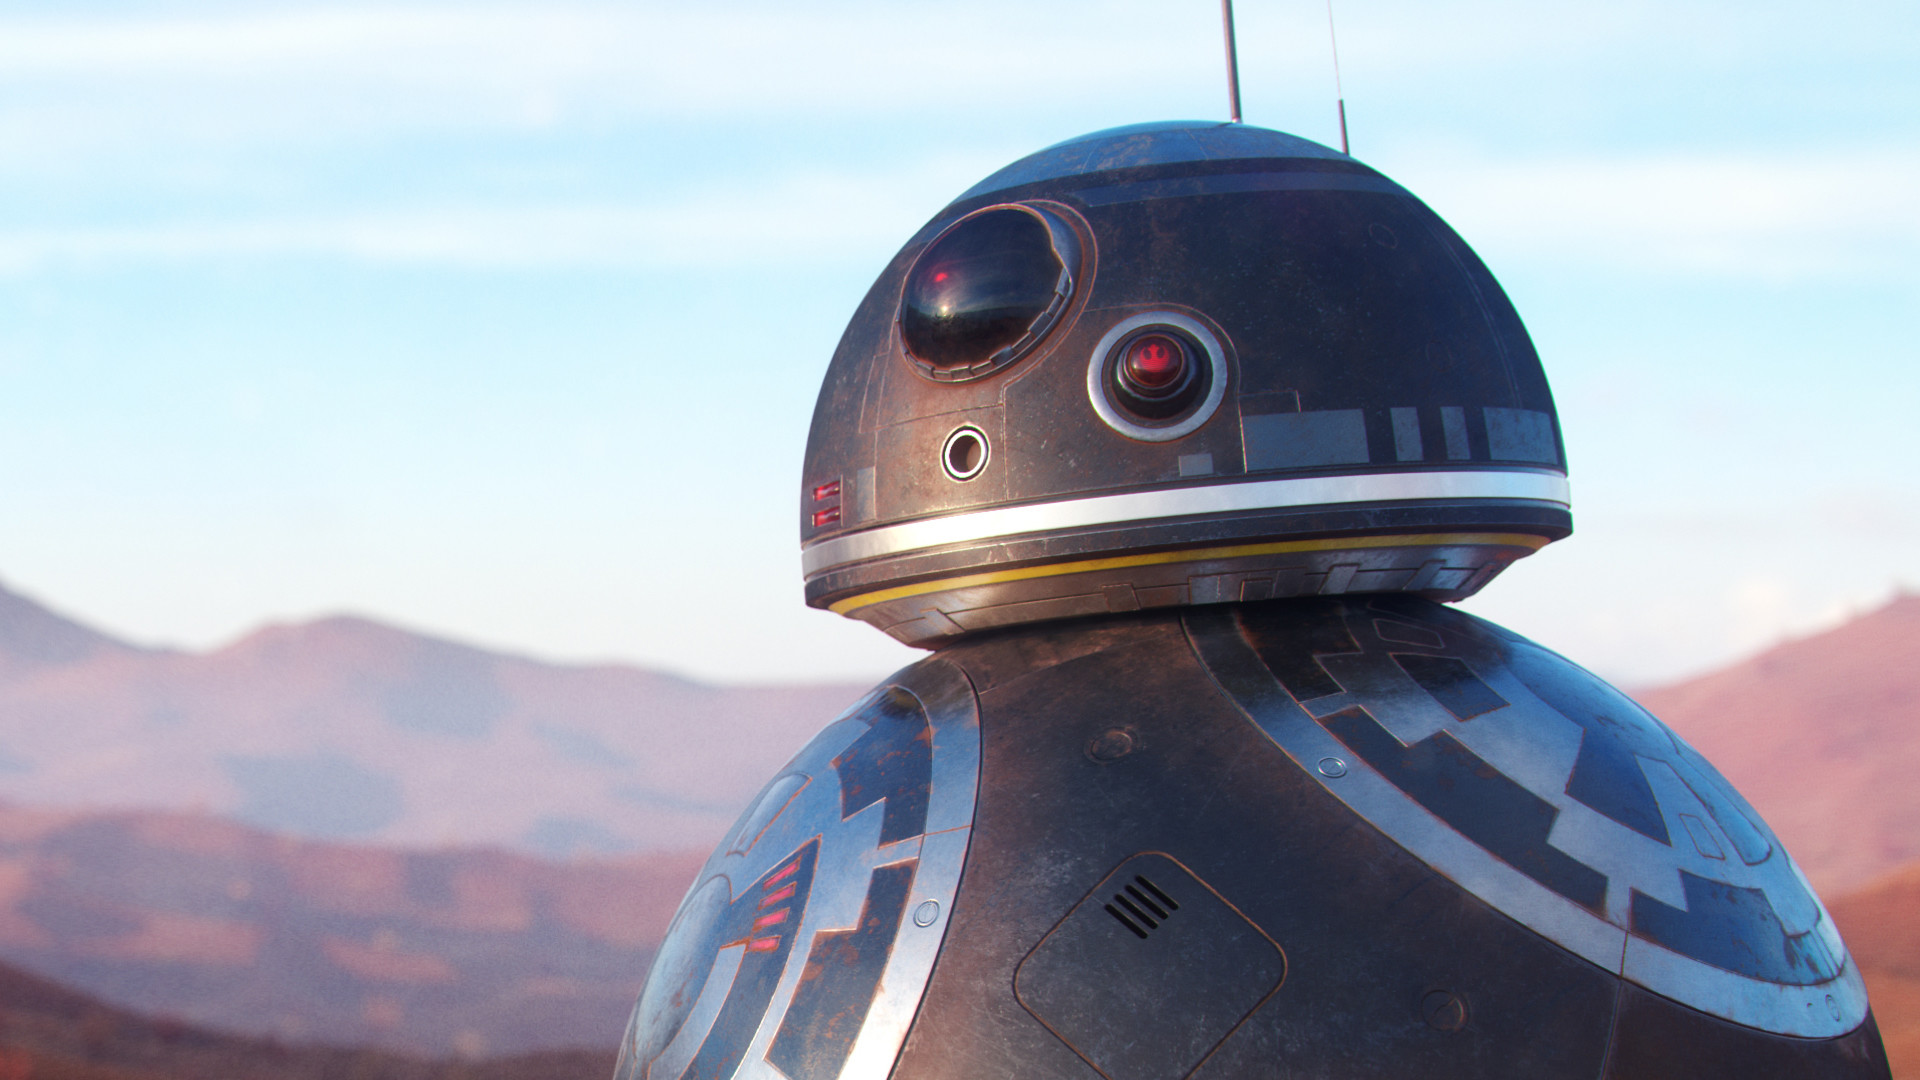 Fine Art: If Force Awakens’ BB-8 Was A Bad Guy